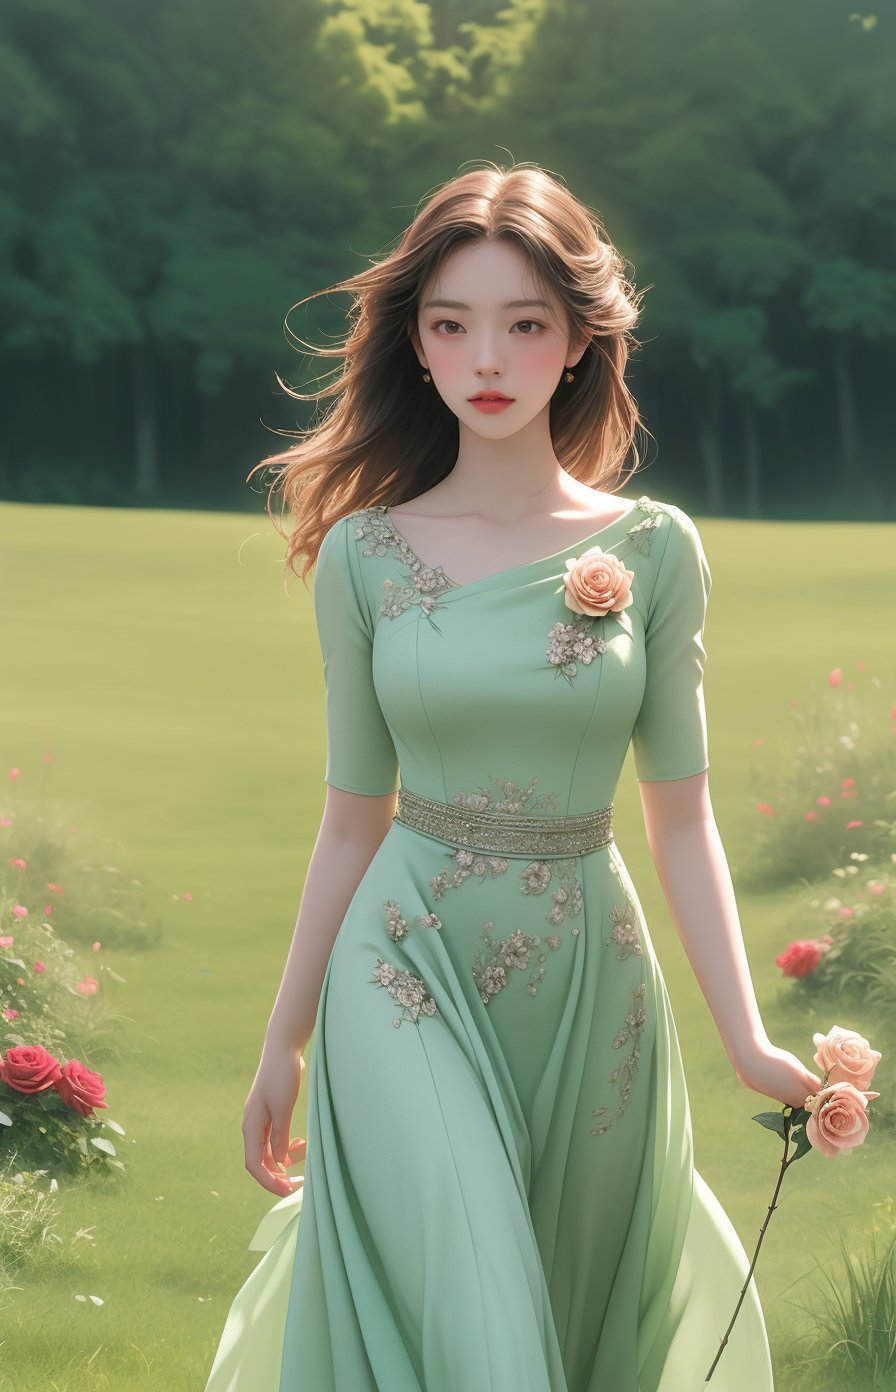 Oil painting, (girl holding a single rose), very delicate and soft lighting, details, Ultra HD, 8k, animated film, soft floral dress, walking through a meadow full of wide green grass,Beautiful girl, less dress, more flower ,deep_throat